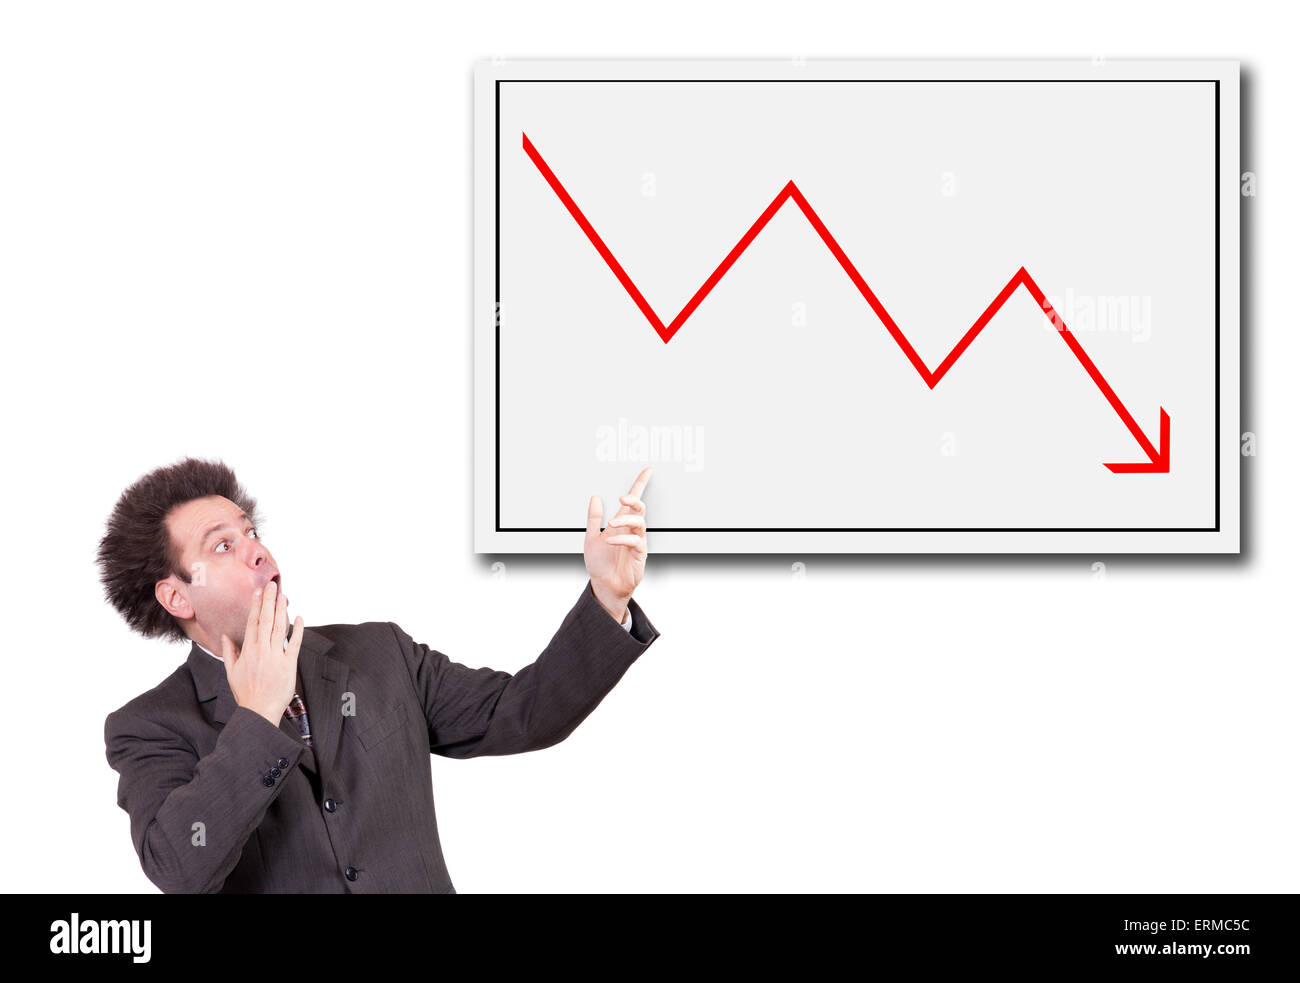 Shocked man in a suit shows a hand on the board with a declining arrow Stock Photo